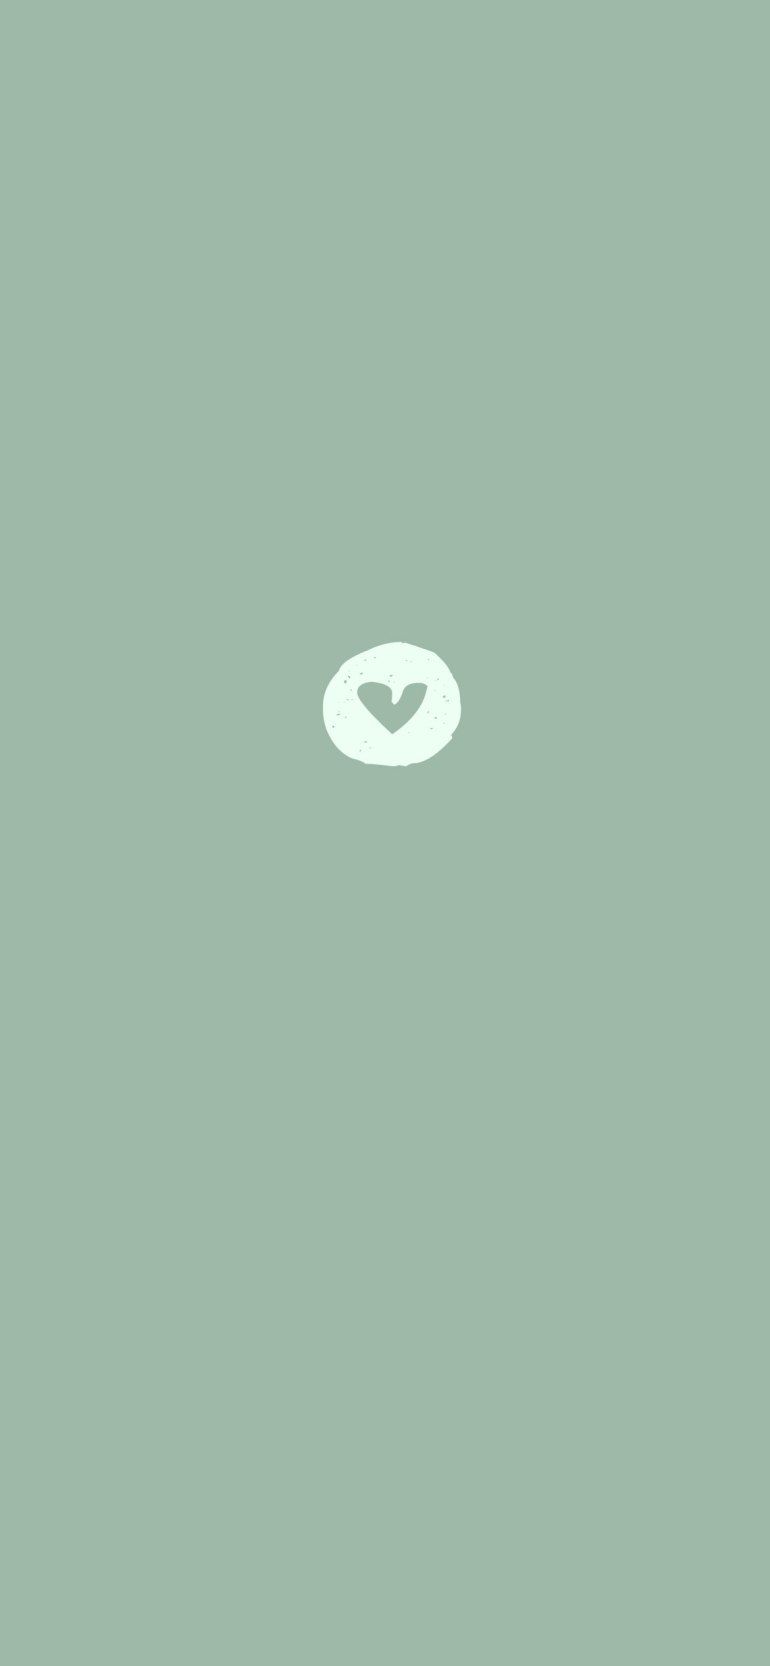 A simple, minimalist phone wallpaper with a white heart on a light green background - Soft green